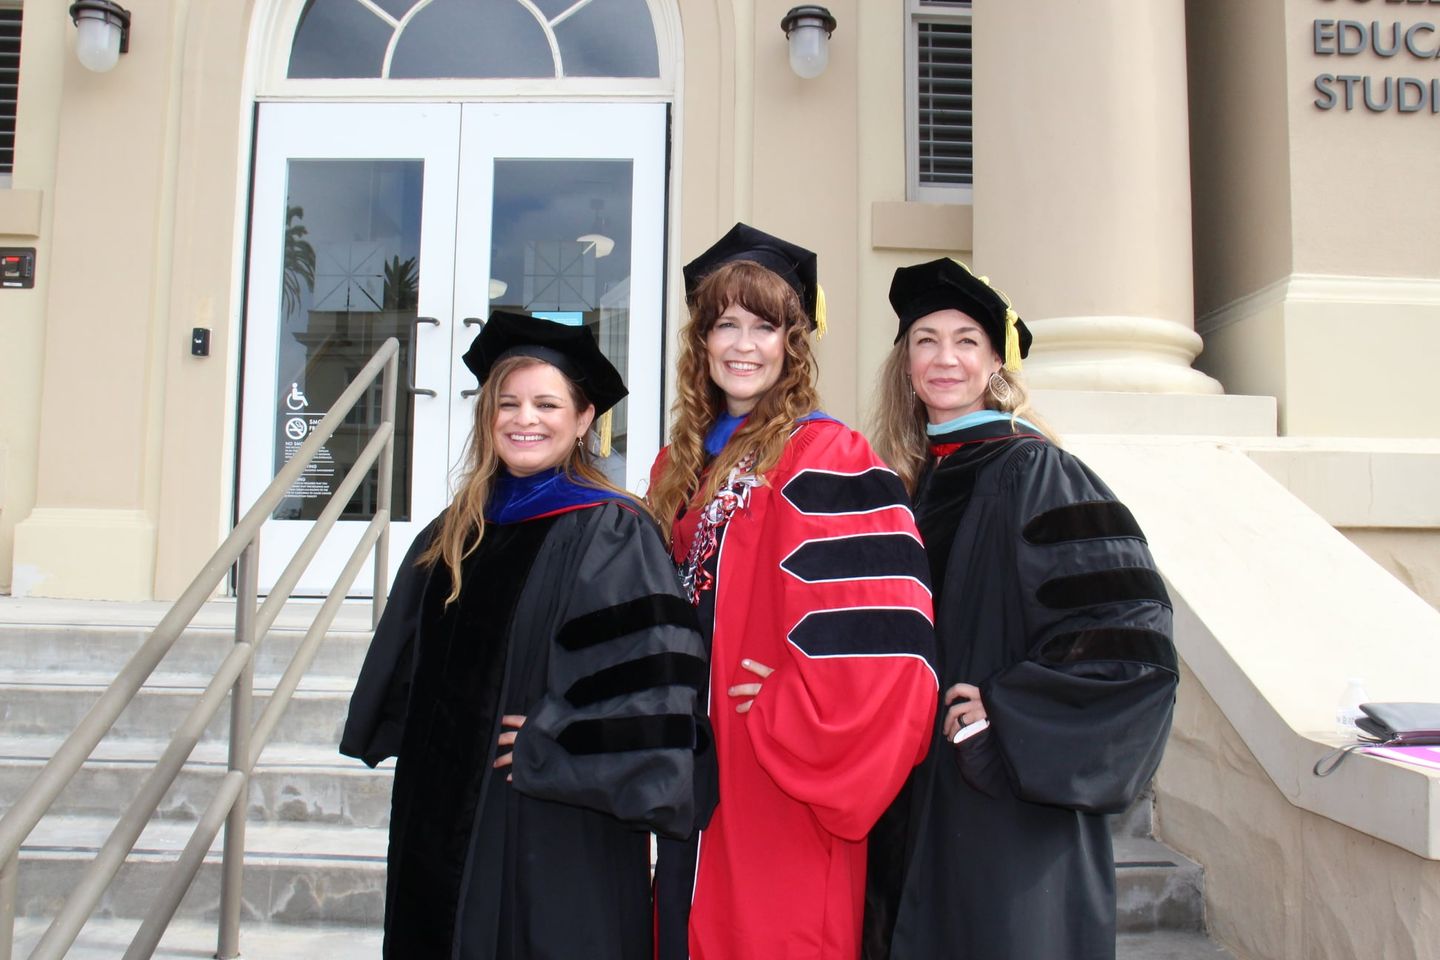 Audri Sandoval Gomez (TPI's Associate Director), Jennifer James (TPI's Office Manager and Special Project Coordinator), and Meghan Cosier (TPI's Director) posing in front of Reeves Hall at Chapman University